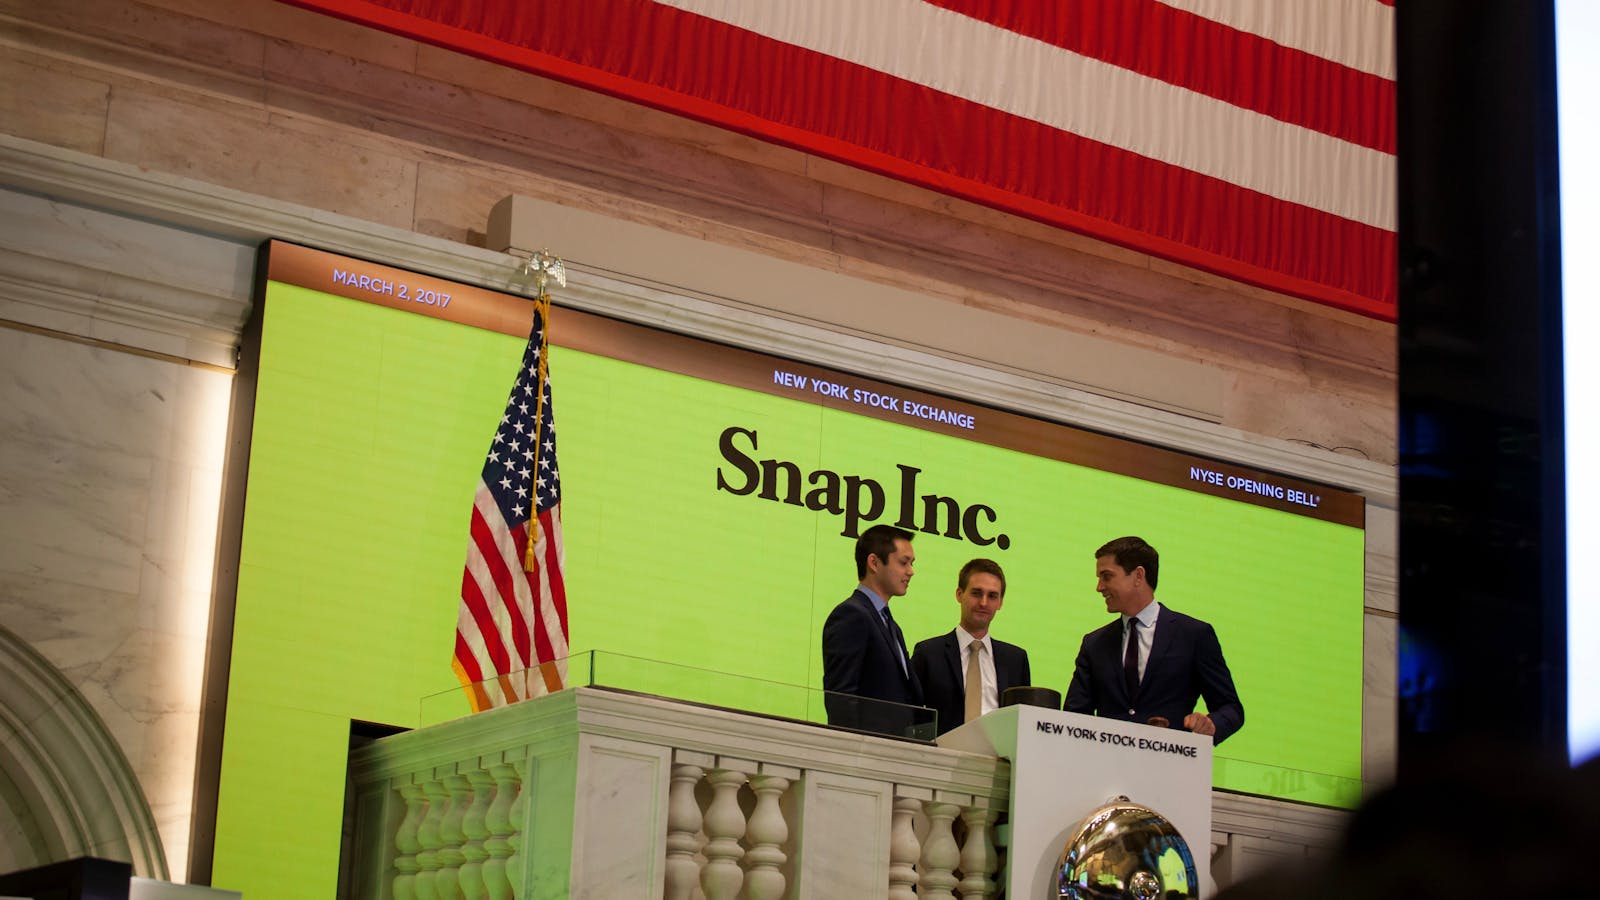 Snap co-founders Robert Murphy and Evan Spiegel at the New York Stock Exchange on Snap's IPO day, with NYSE President Tom Farley. Photo by Bloomberg.